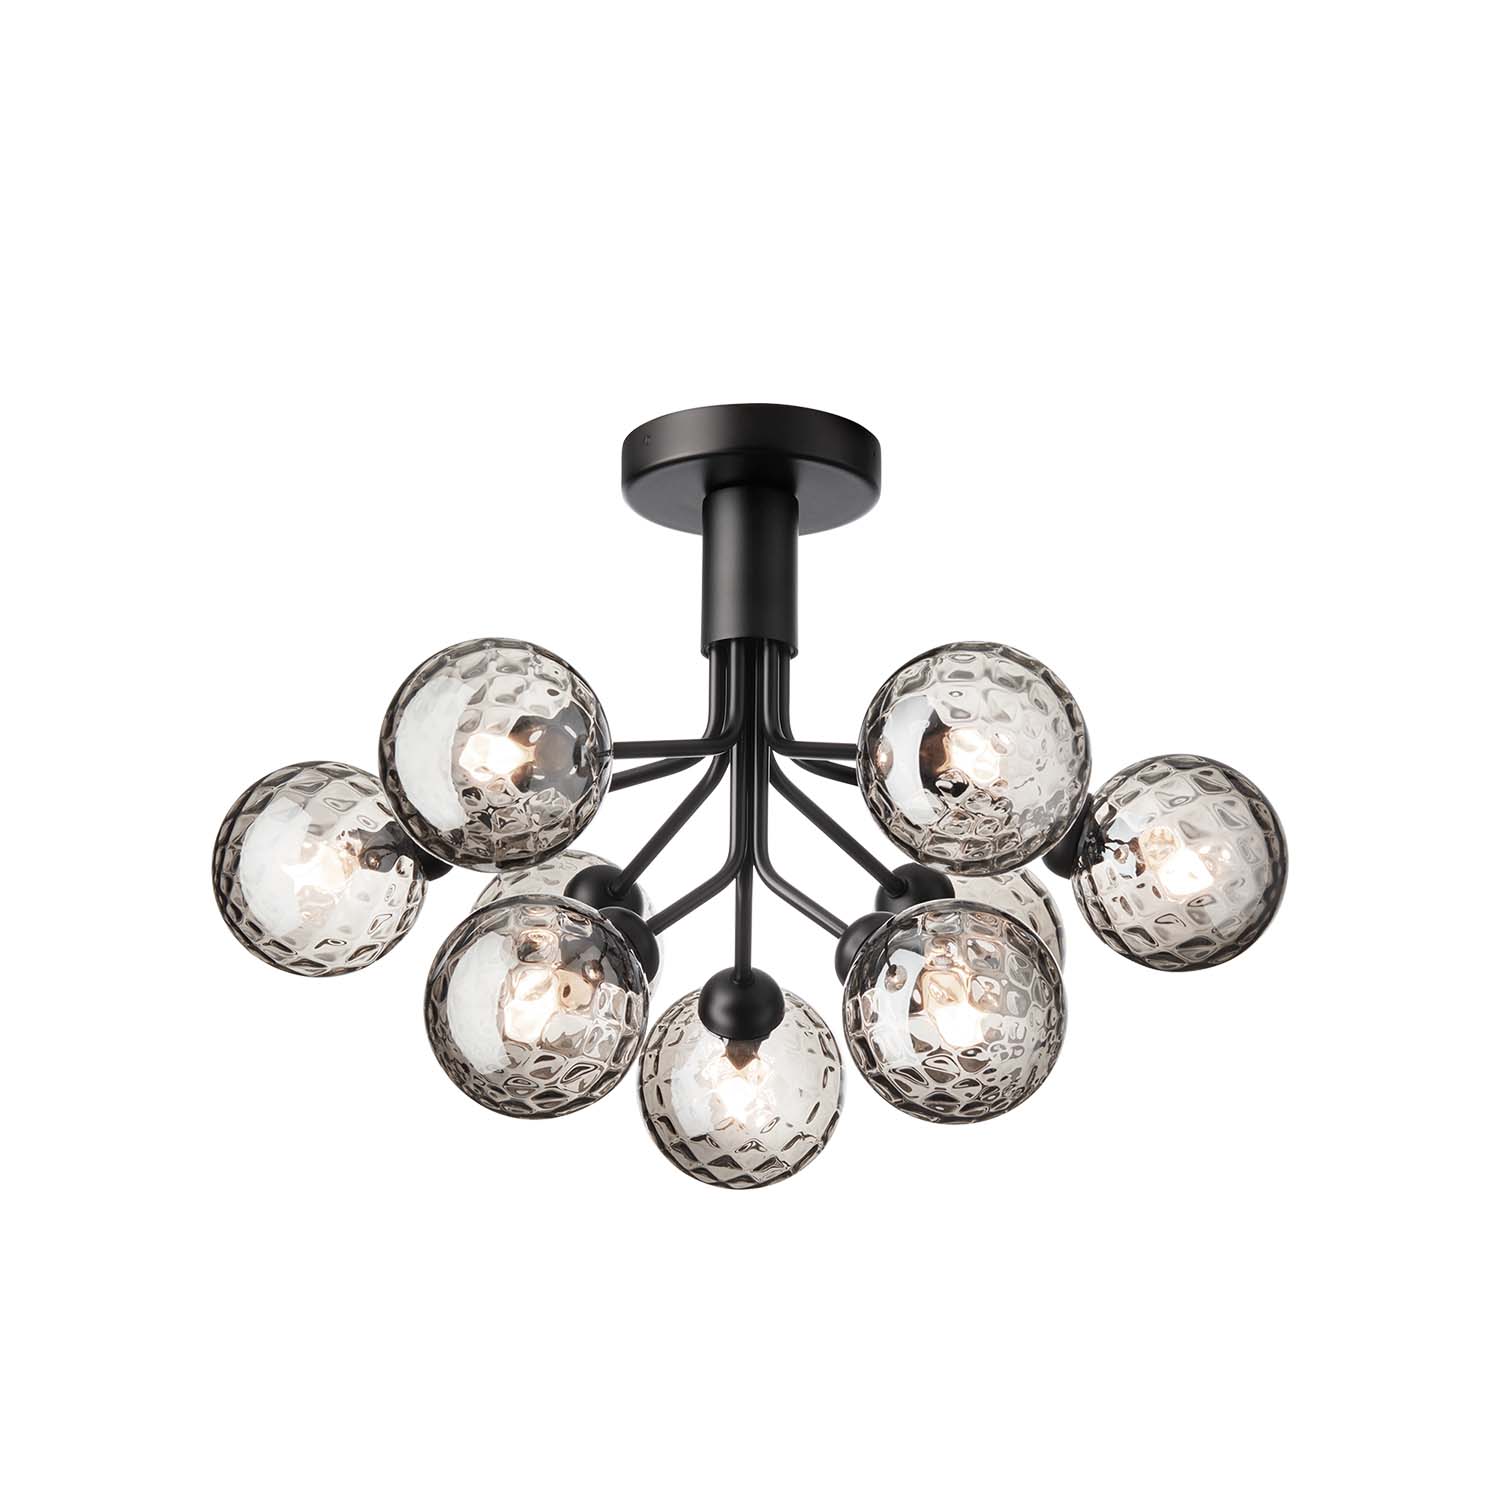 APIALES Optic - Black or gold ceiling light with glass globes